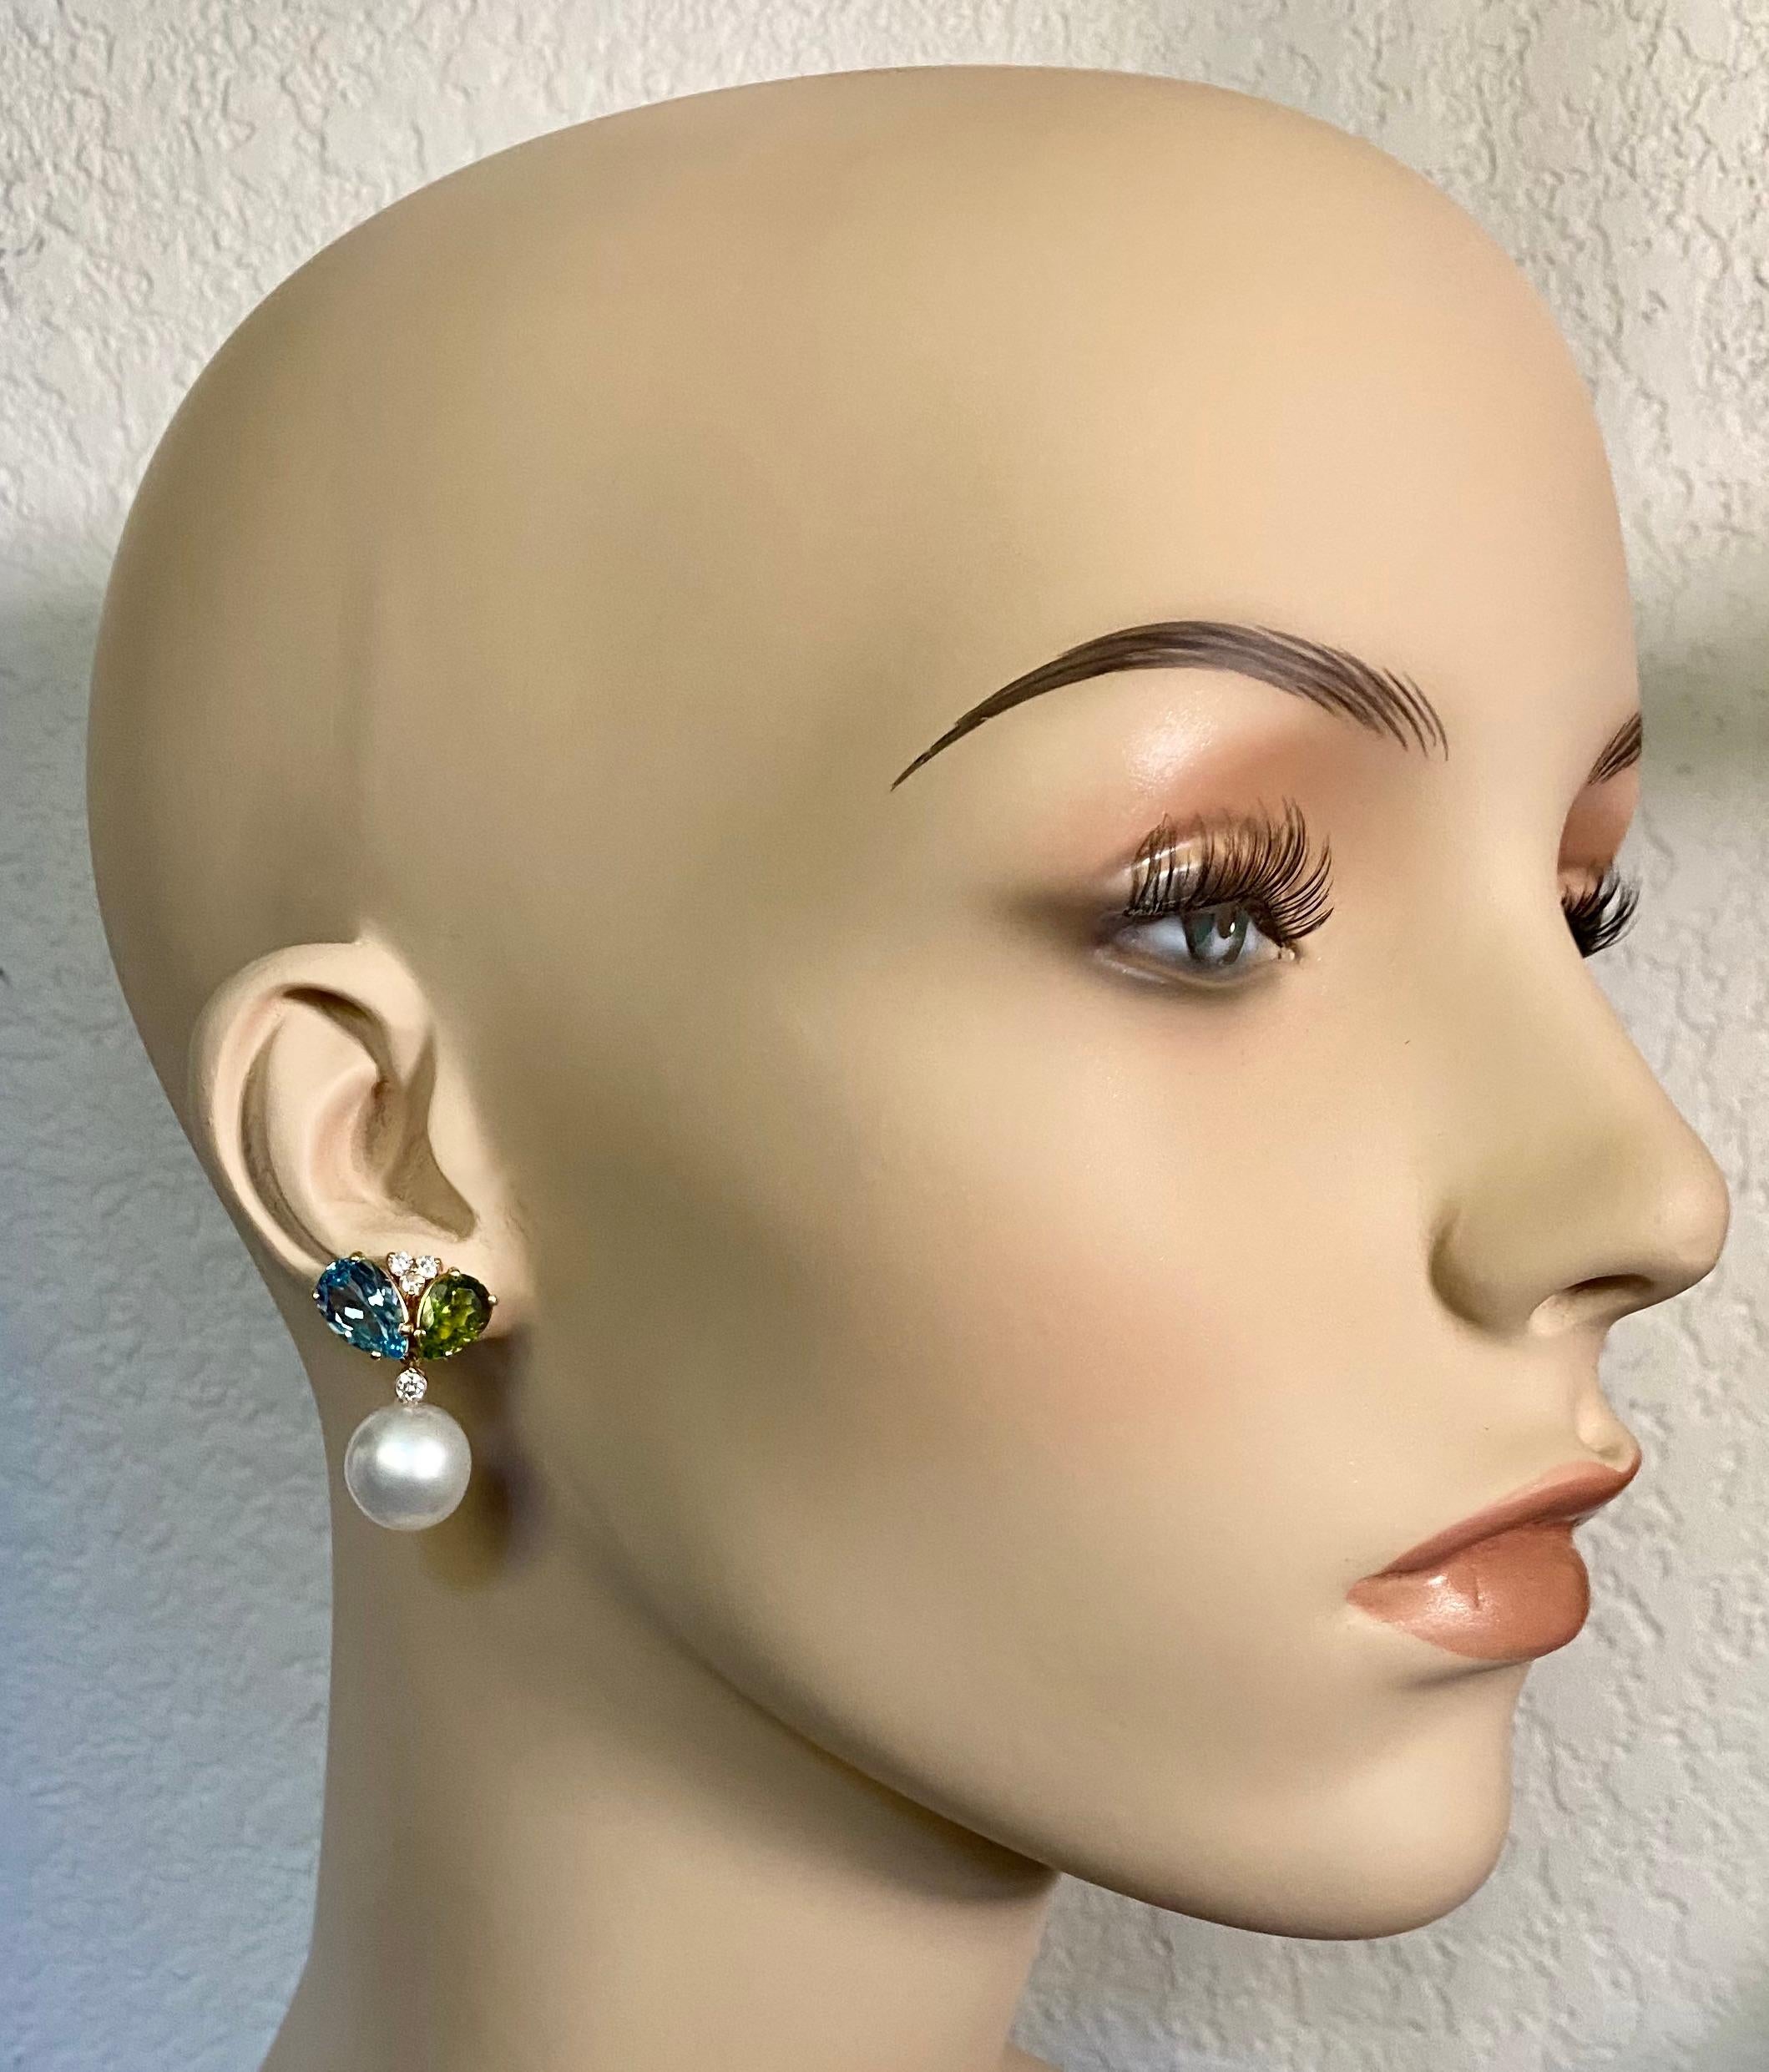 Blue topaz and peridot are integrated with the Paspaley South Seas pearls to form these elegant dangle earrings.  Both gems are pear shaped with intense color saturation and are well cut and polished.  They are complimented with clusters of white